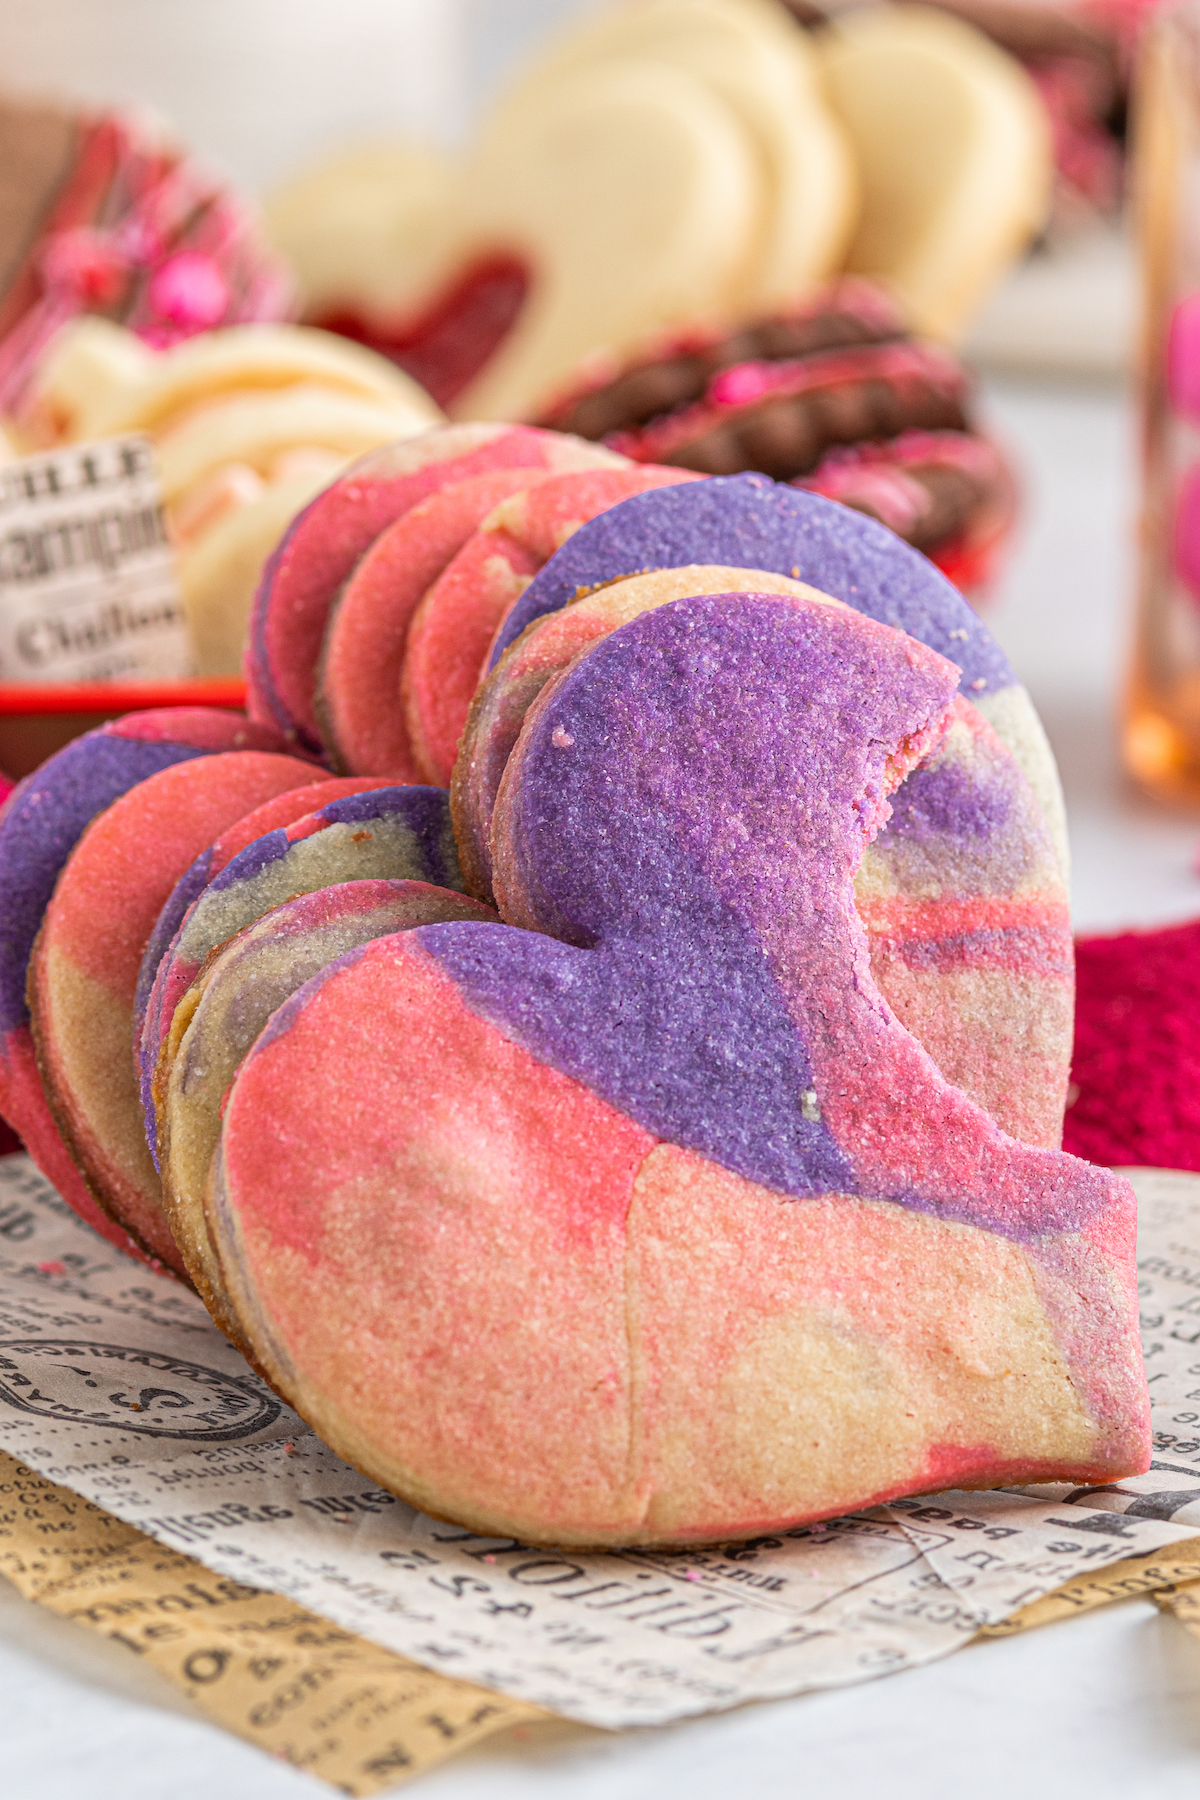 A stack of pink-and-purple heart-shaped cookies is leaning against a platter of assorted cookies. The first cookie in the stack has a bite taken out of it.